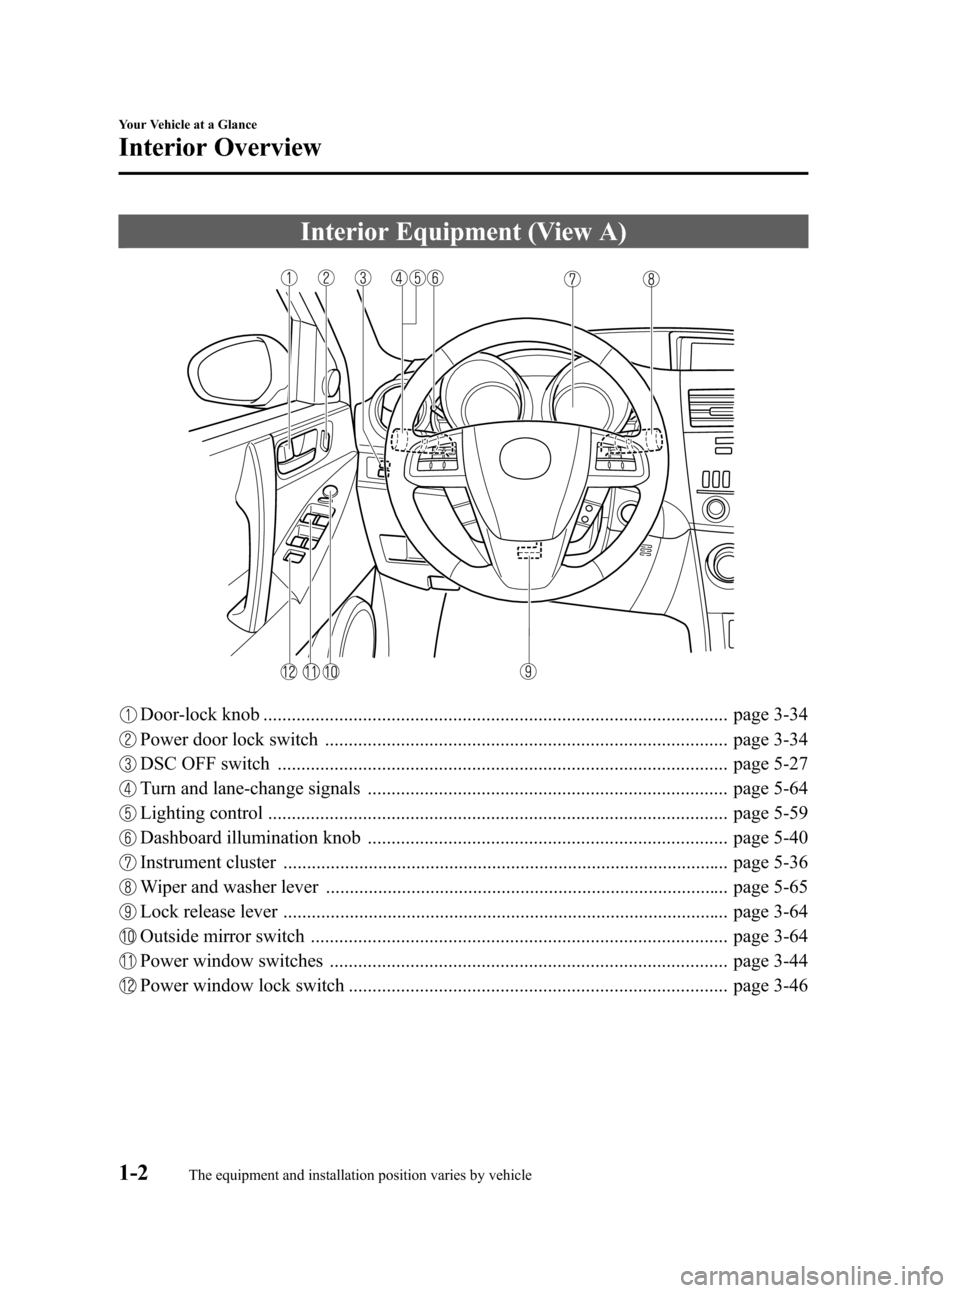 MAZDA MODEL 3 HATCHBACK 2011  Owners Manual (in English) Black plate (8,1)
Interior Equipment (View A)
Door-lock knob .................................................................................................. page 3-34
Power door lock switch .......